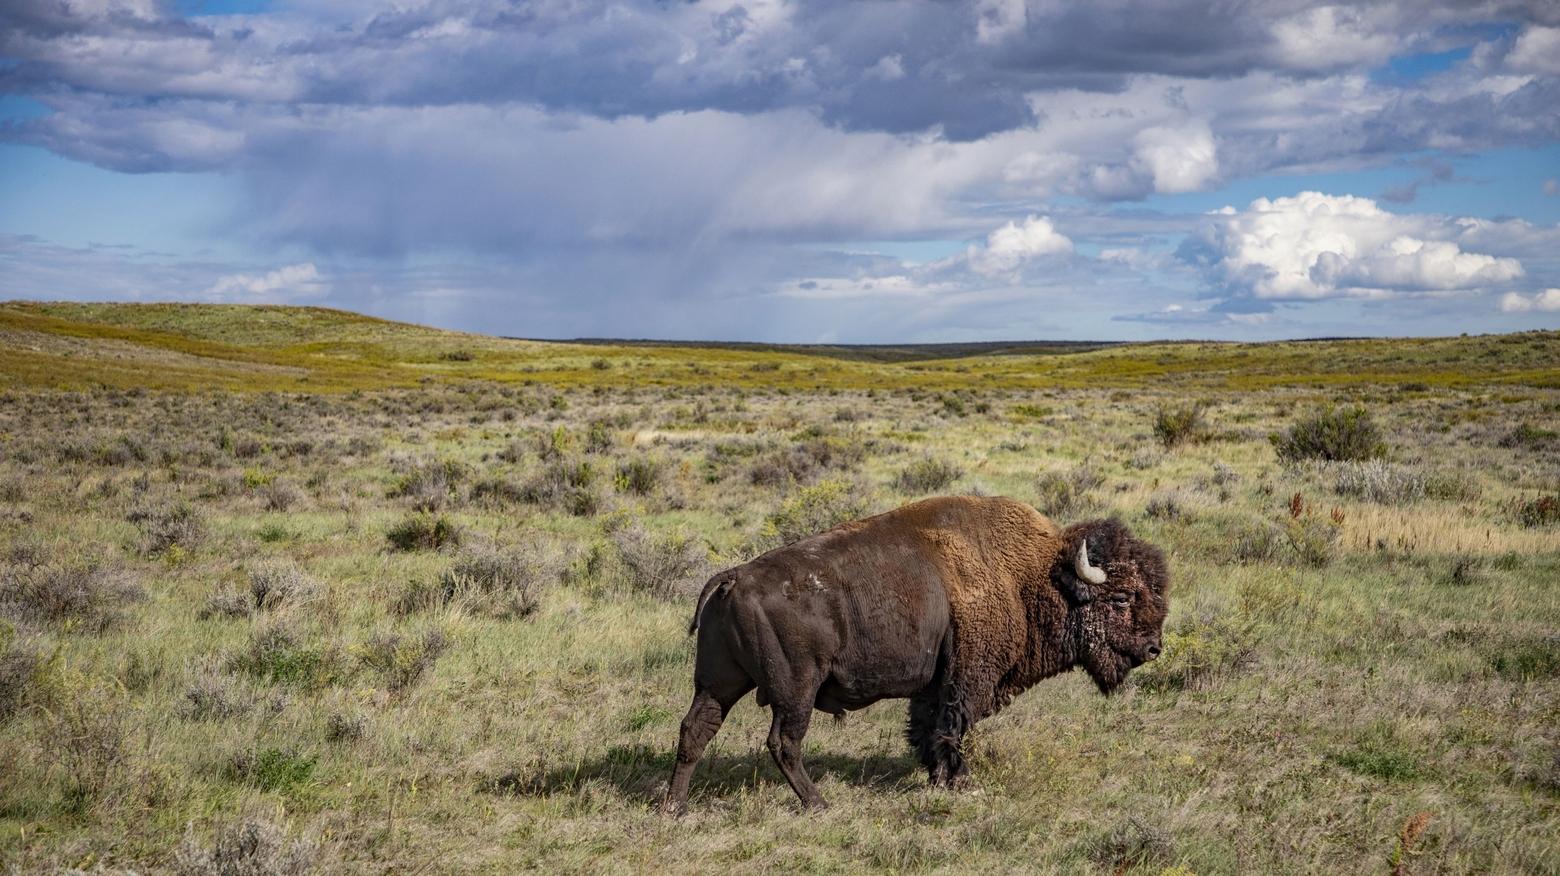 In the 1800s, bison numbered as many as 30 million in America. By the end of the century, their numbers had dwindled to fewer than 1,000. "The American Buffalo" tells the story of one of the greatest tragedies in American history and the inextricable connection between bison and Indigenous tribes of North America. The new film premieres on PBS Oct. 16 and 17. Here, a bison is backdropped by the Montana sky, September 2019. Photo by Craig Mellish